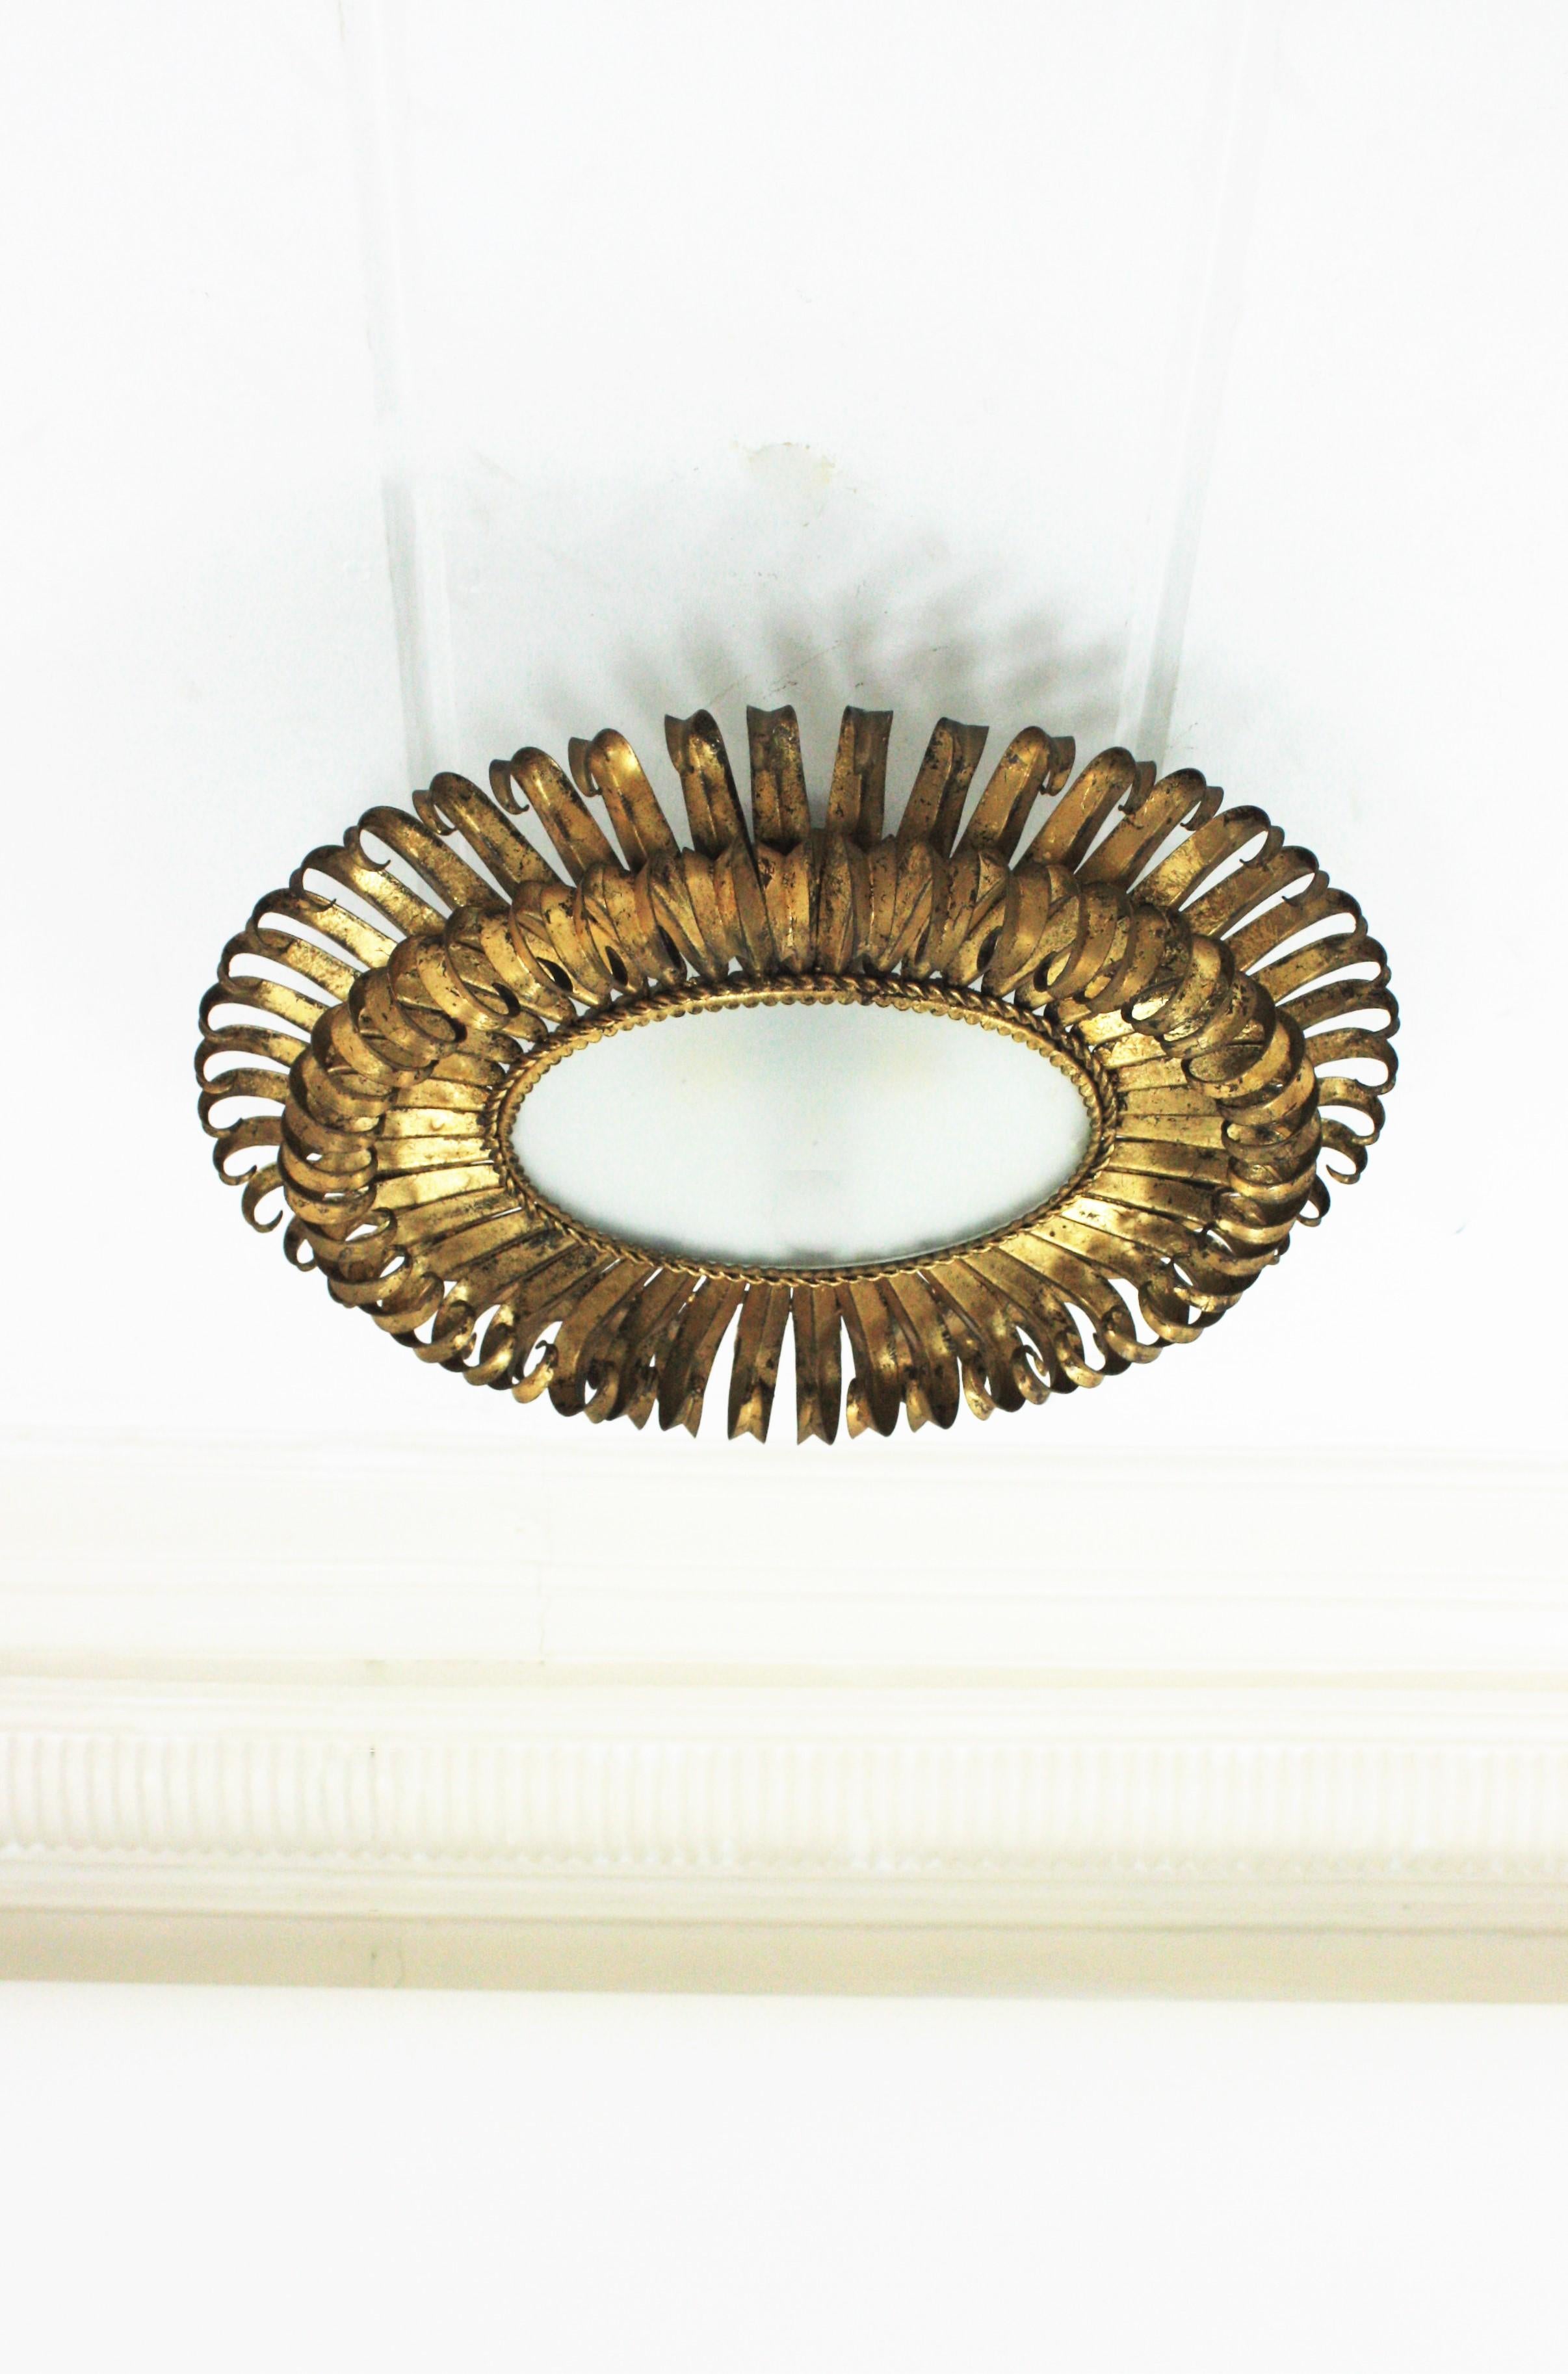 Stunning hand-hammered double layered eyelash gilt iron oval sunburst flush mount / pendant. France, 1950s. 
The frame is made by a double layer of curved beams in eyelash shape that makes the piece highly decorative. It has gold leaf finish and a